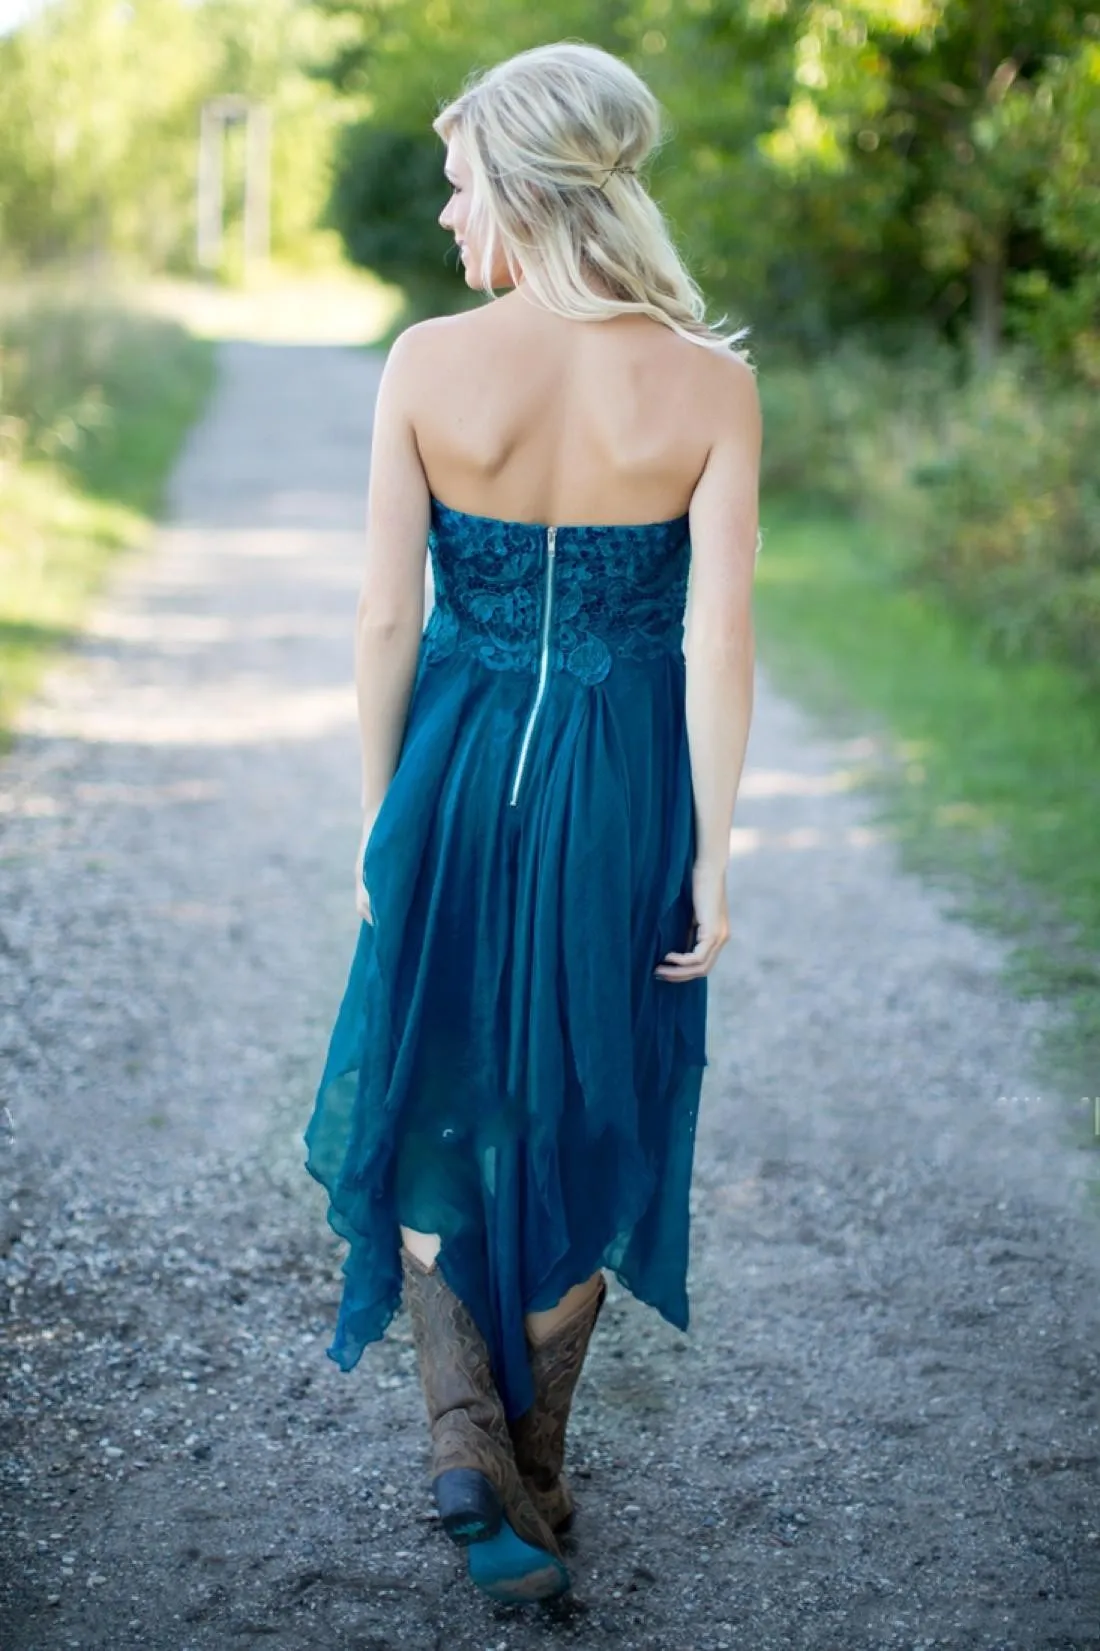 Country Bridesmaid Dresses 2019 Short Hot Cheap For Wedding Teal Chiffon Beach Lace High Low Ruffles Party Maid Honor Gowns Under 100